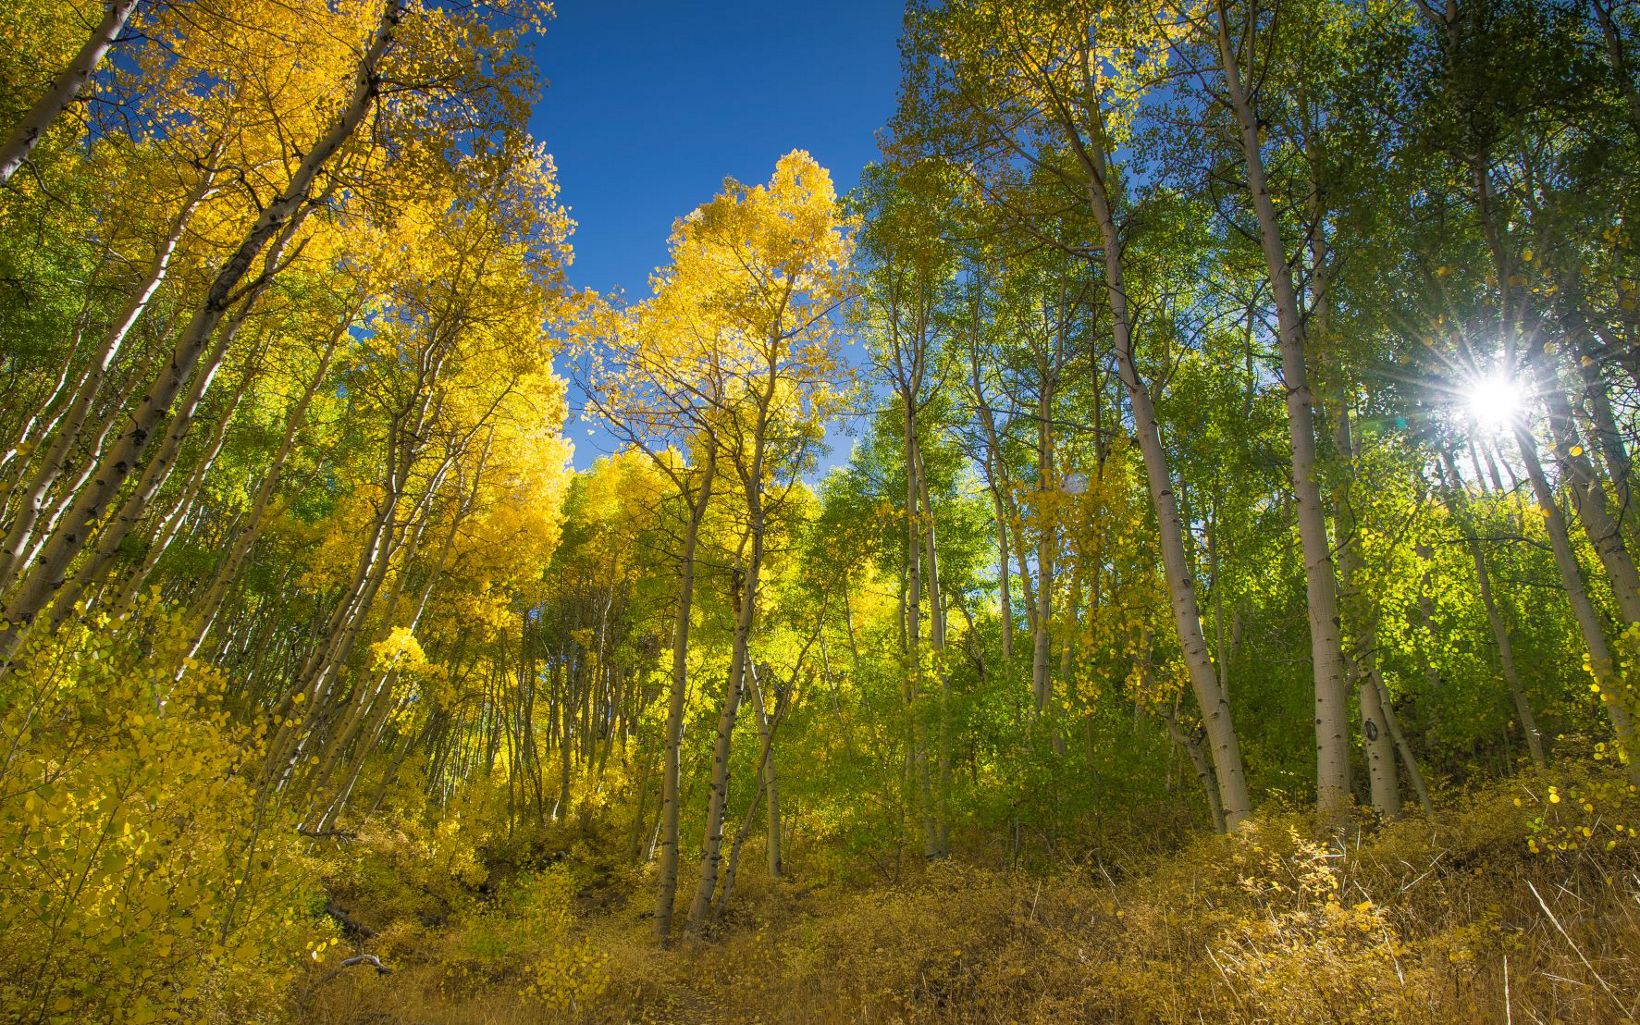 Aspen in Nevada Groundwater-dependent aspen in the Toiyabes in Nevada © C. Carroon / TNC